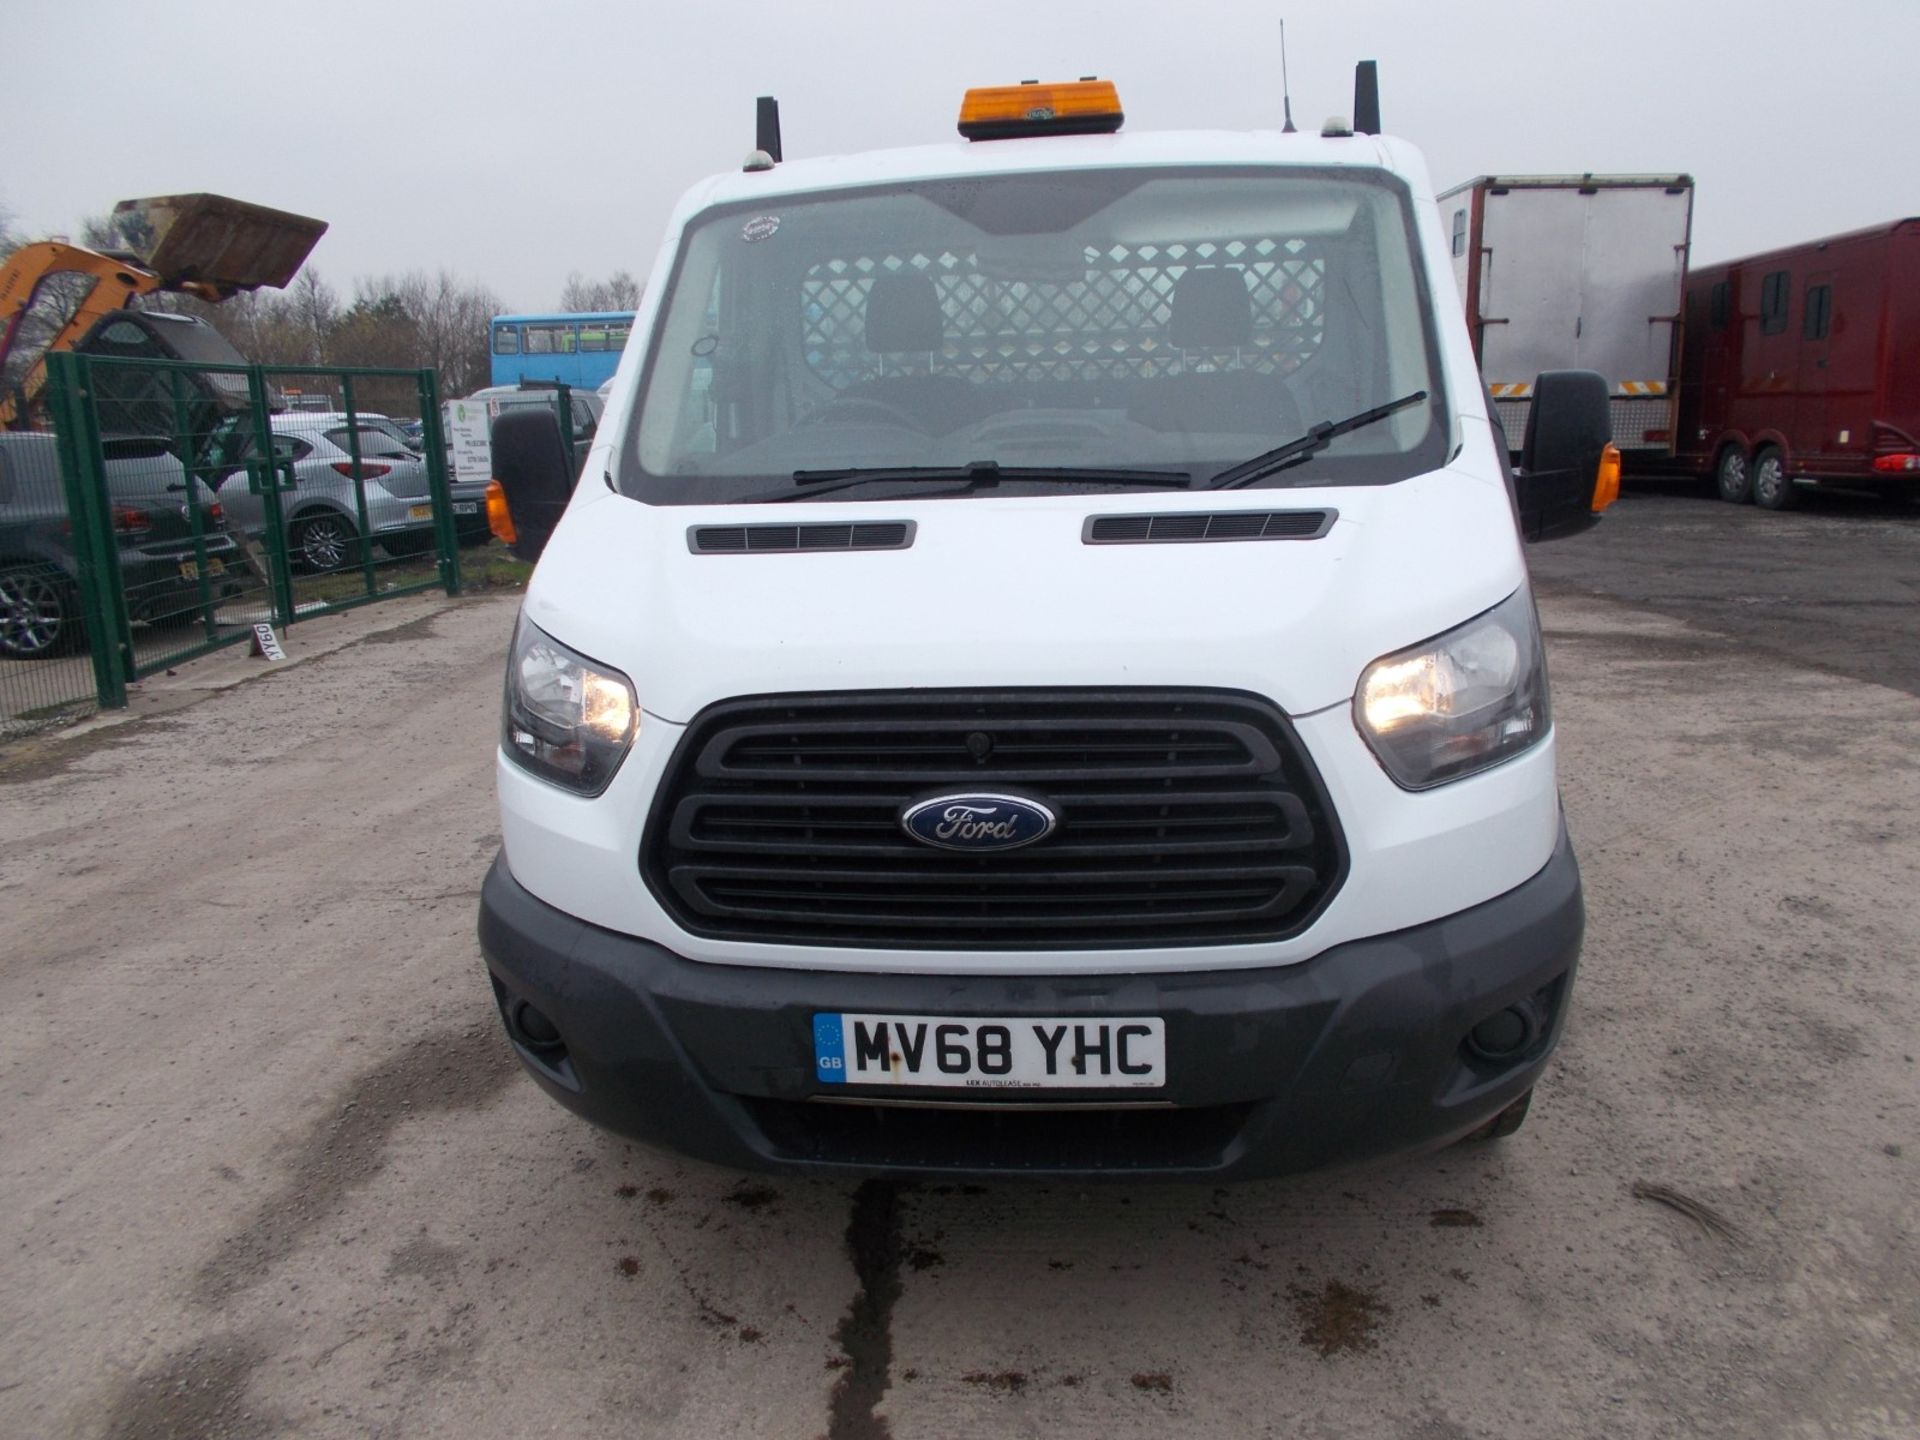 2018/68 FORD TRANSIT 350 DROPSIDE LORRY, 2.0 DIESEL, 6 SPEED MANUAL, 59K MILES, STARTS RUNS DRIVES - Image 2 of 24